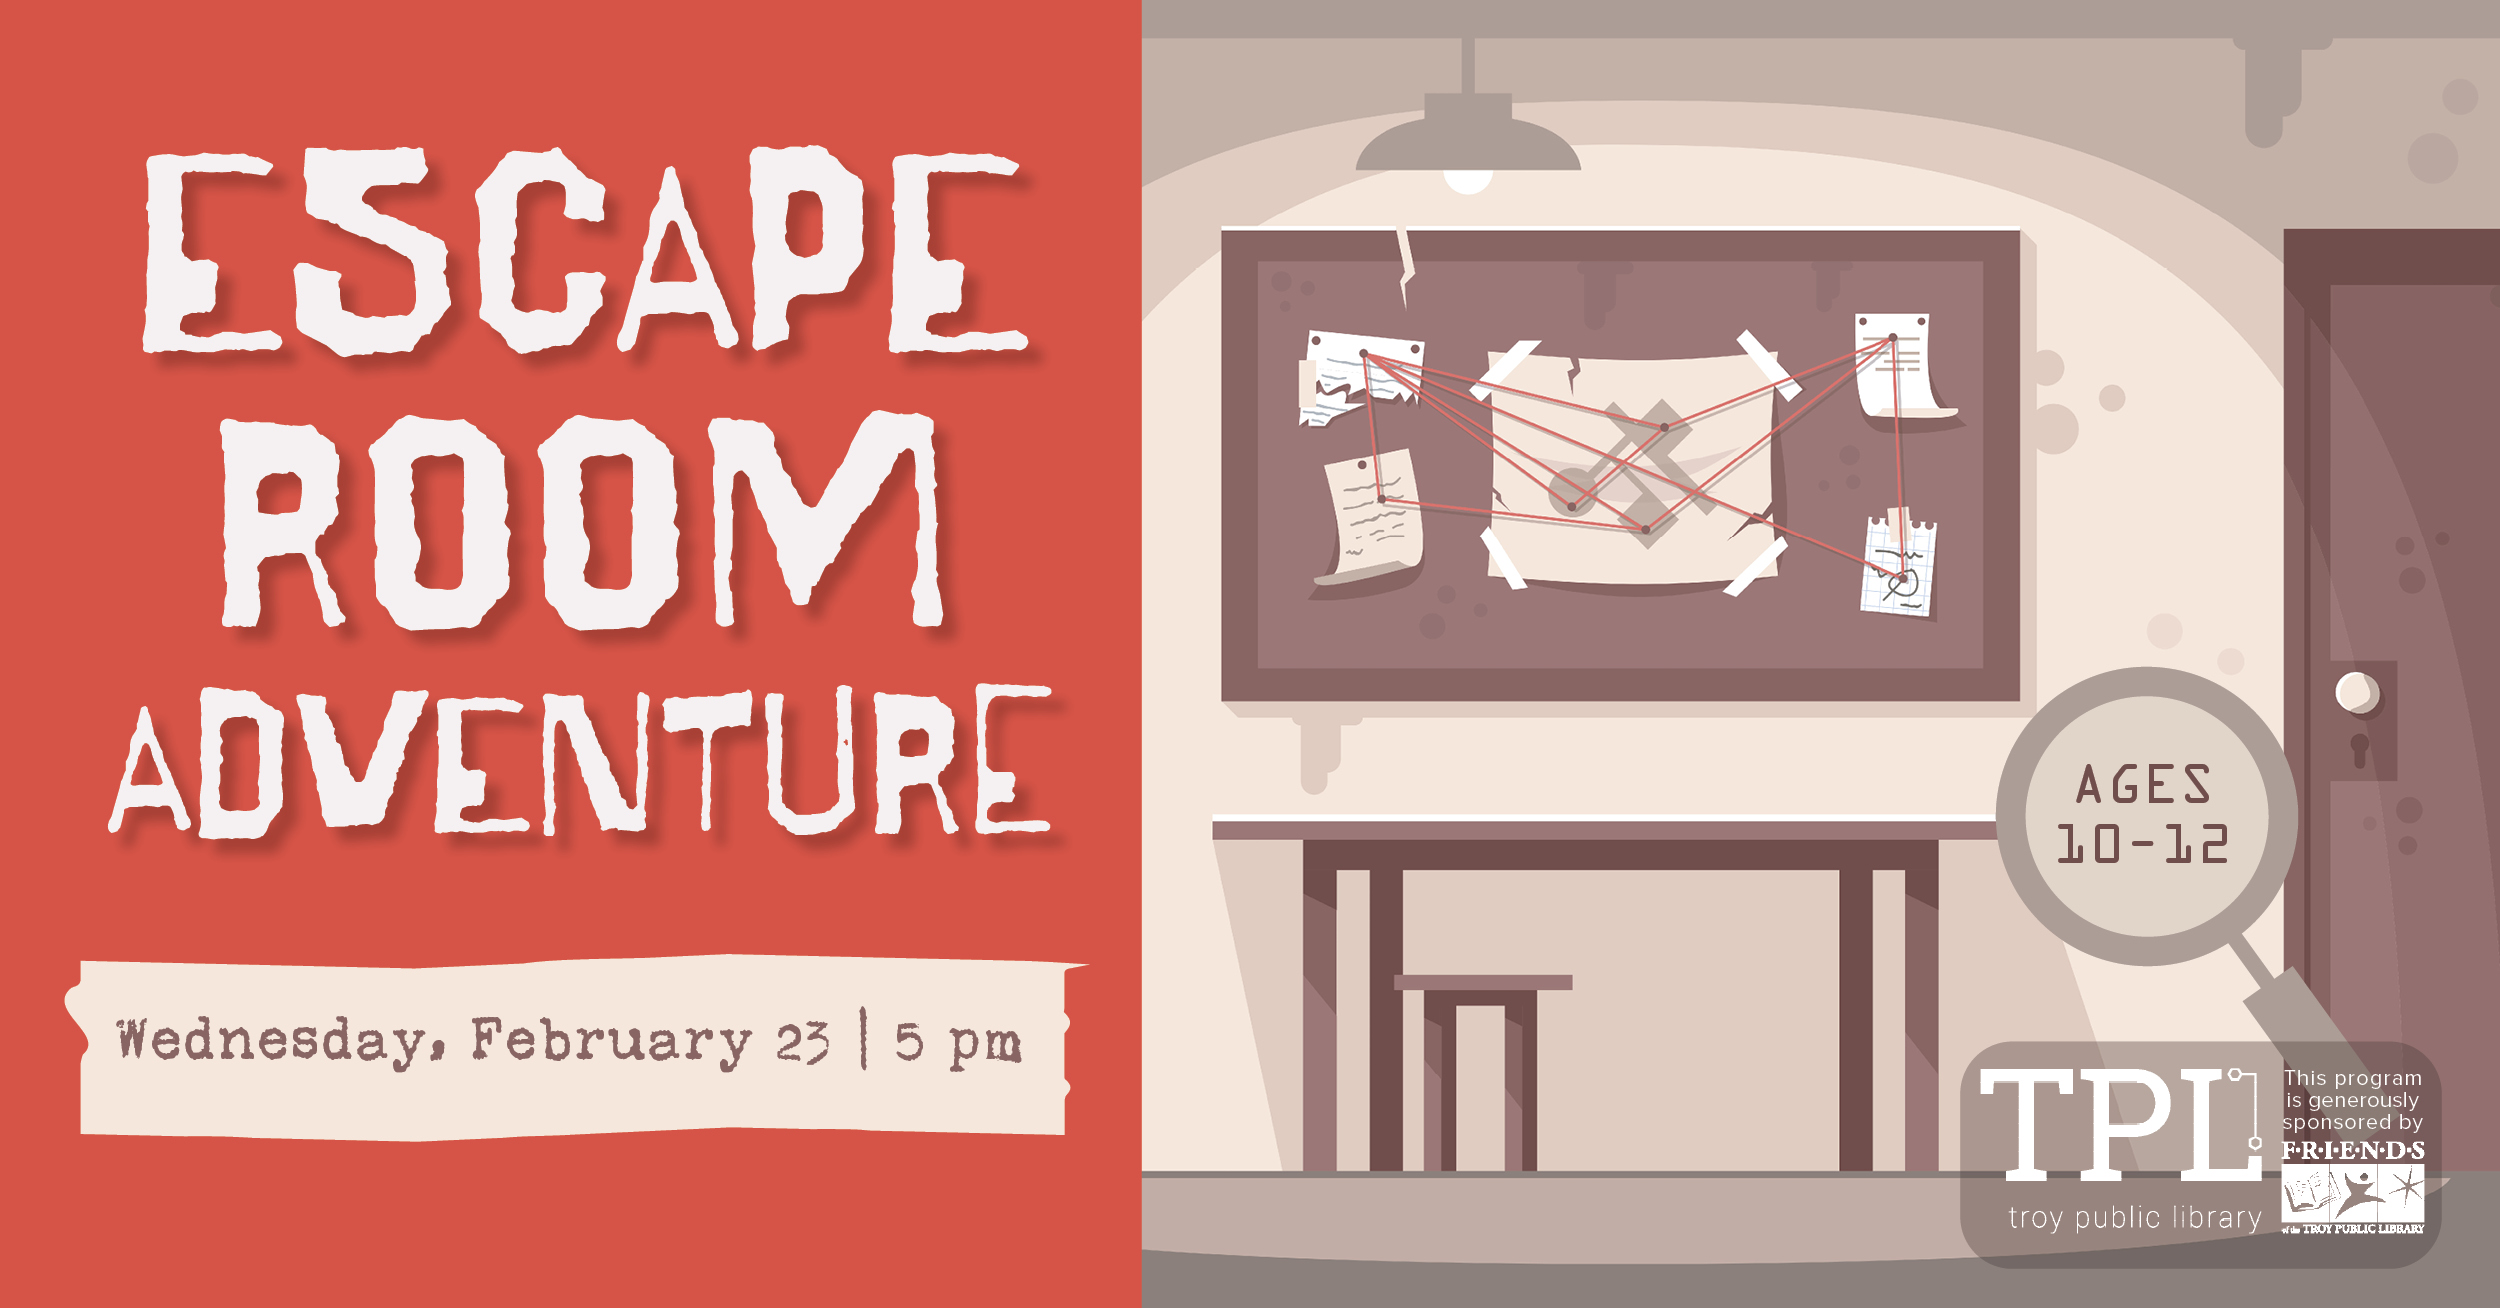 Escape Room Adventure Wednesday, February 23 at 5pm. Sponsored by the Friends of the Troy Public Library